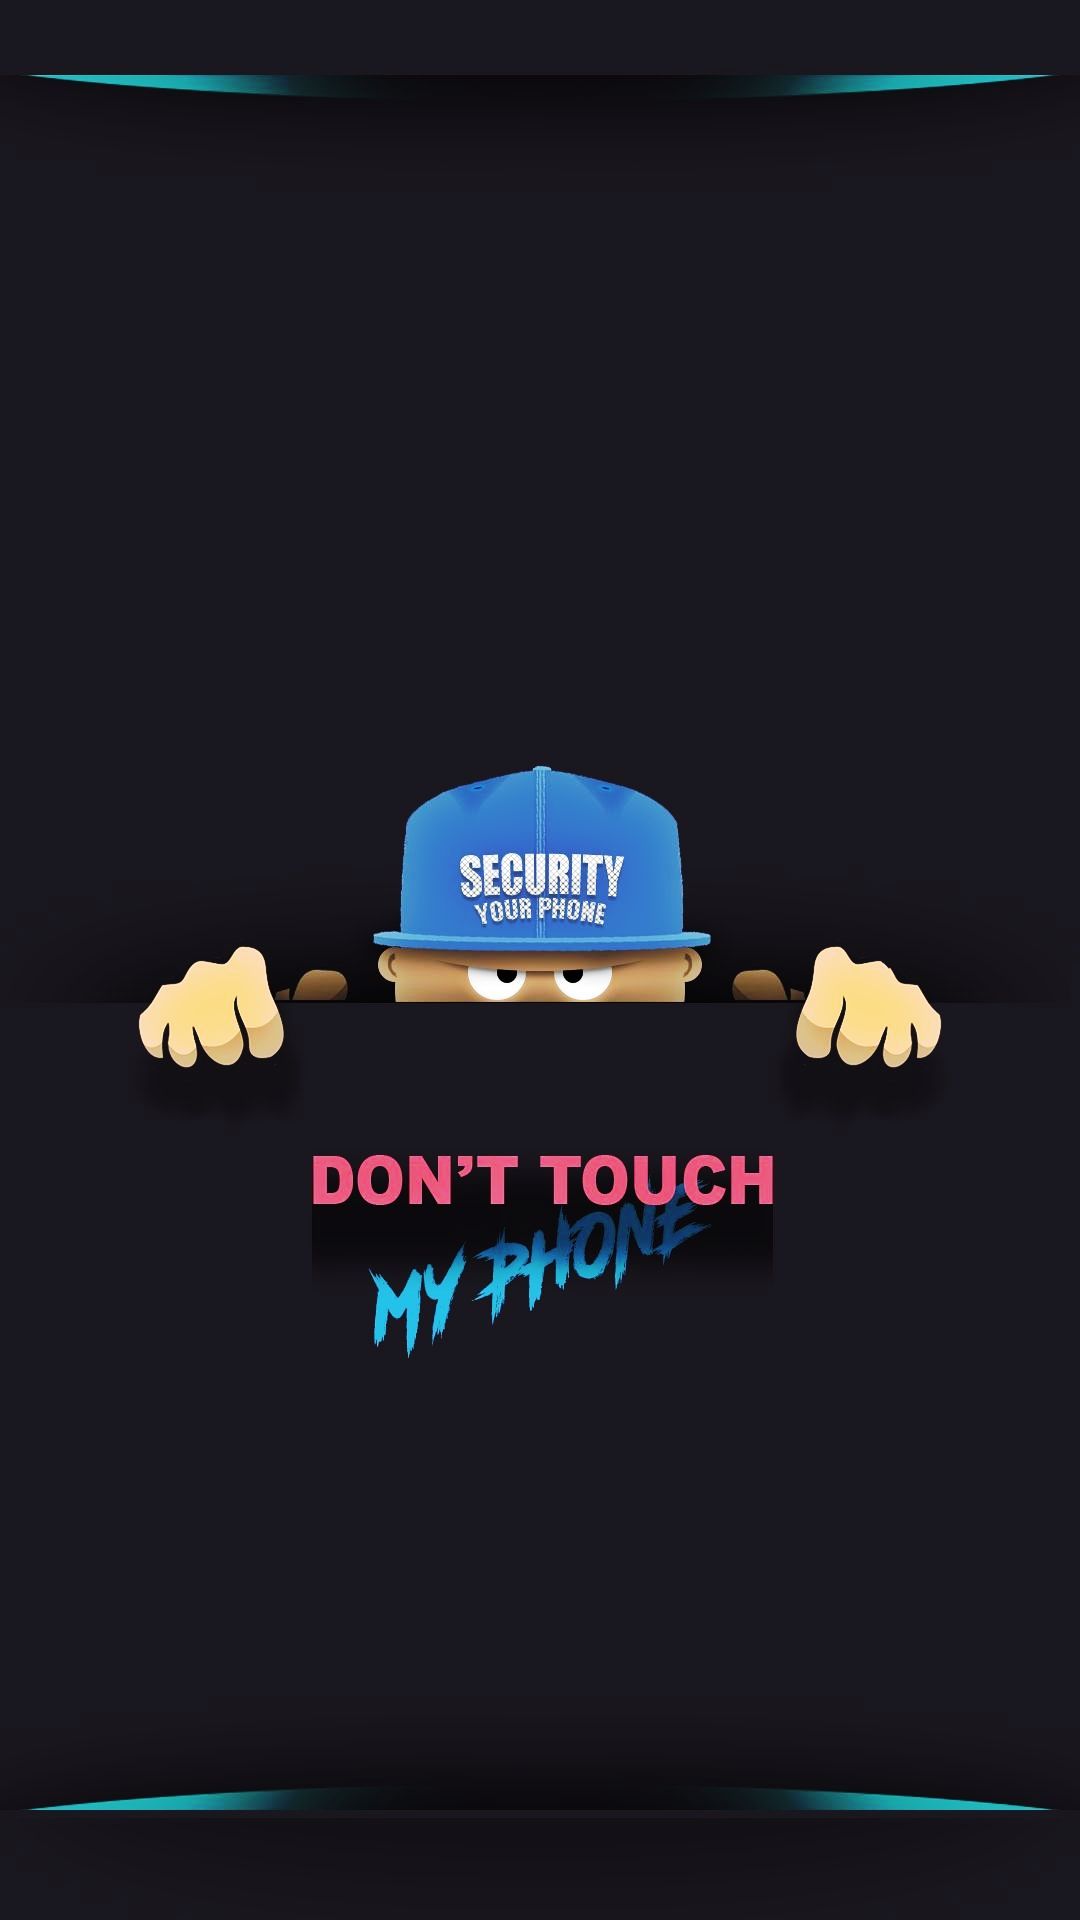 Don't Touch My Phone Wallpaper Wallpaper Lockscreen For Android Wallpaper & Background Download